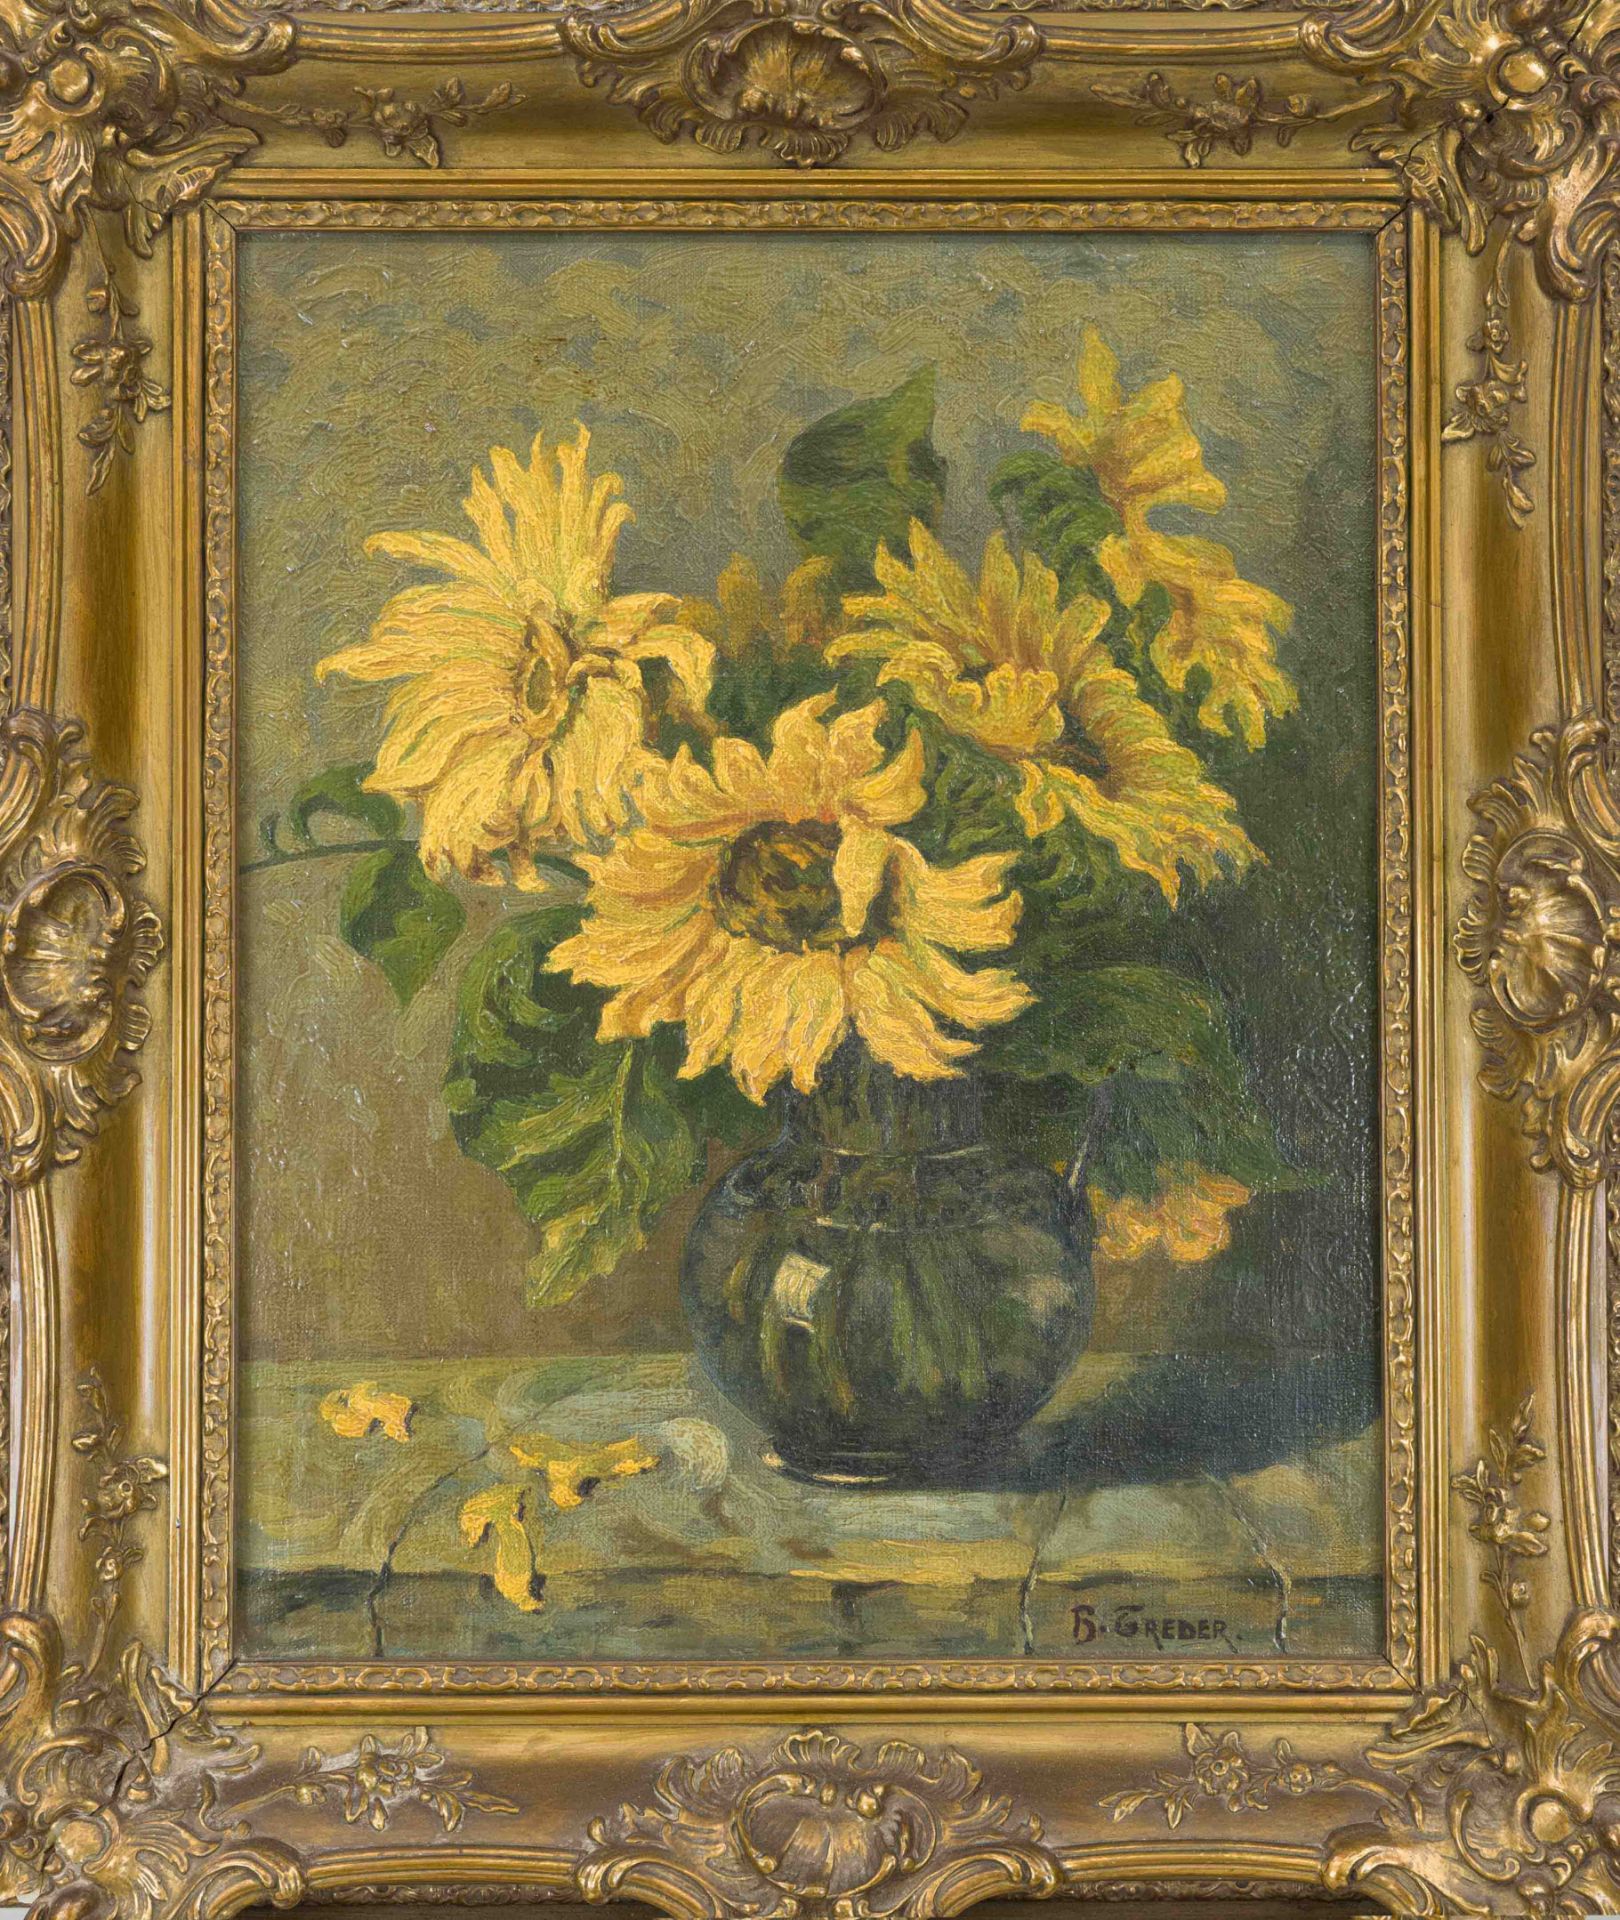 Hermann Treder (1876-?), Bouquet of Sunflowers in a Ball Vase, oil on canvas, signed lower right, 60